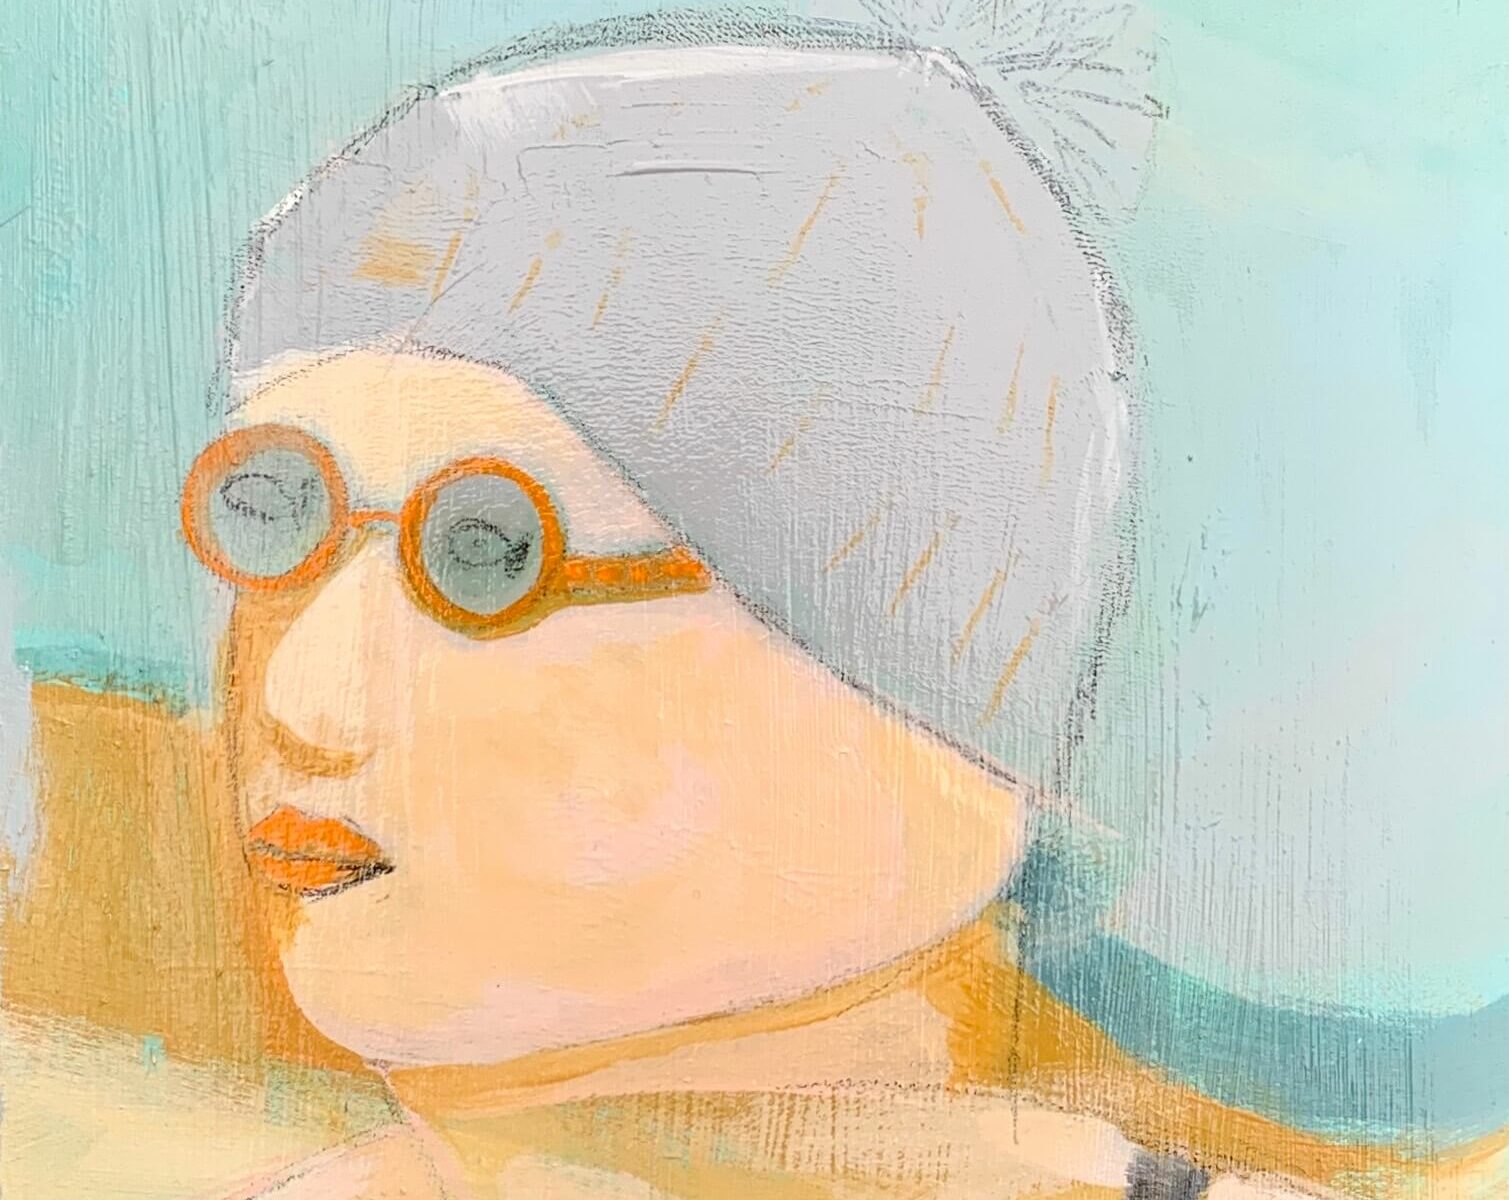 paintings of swimmers